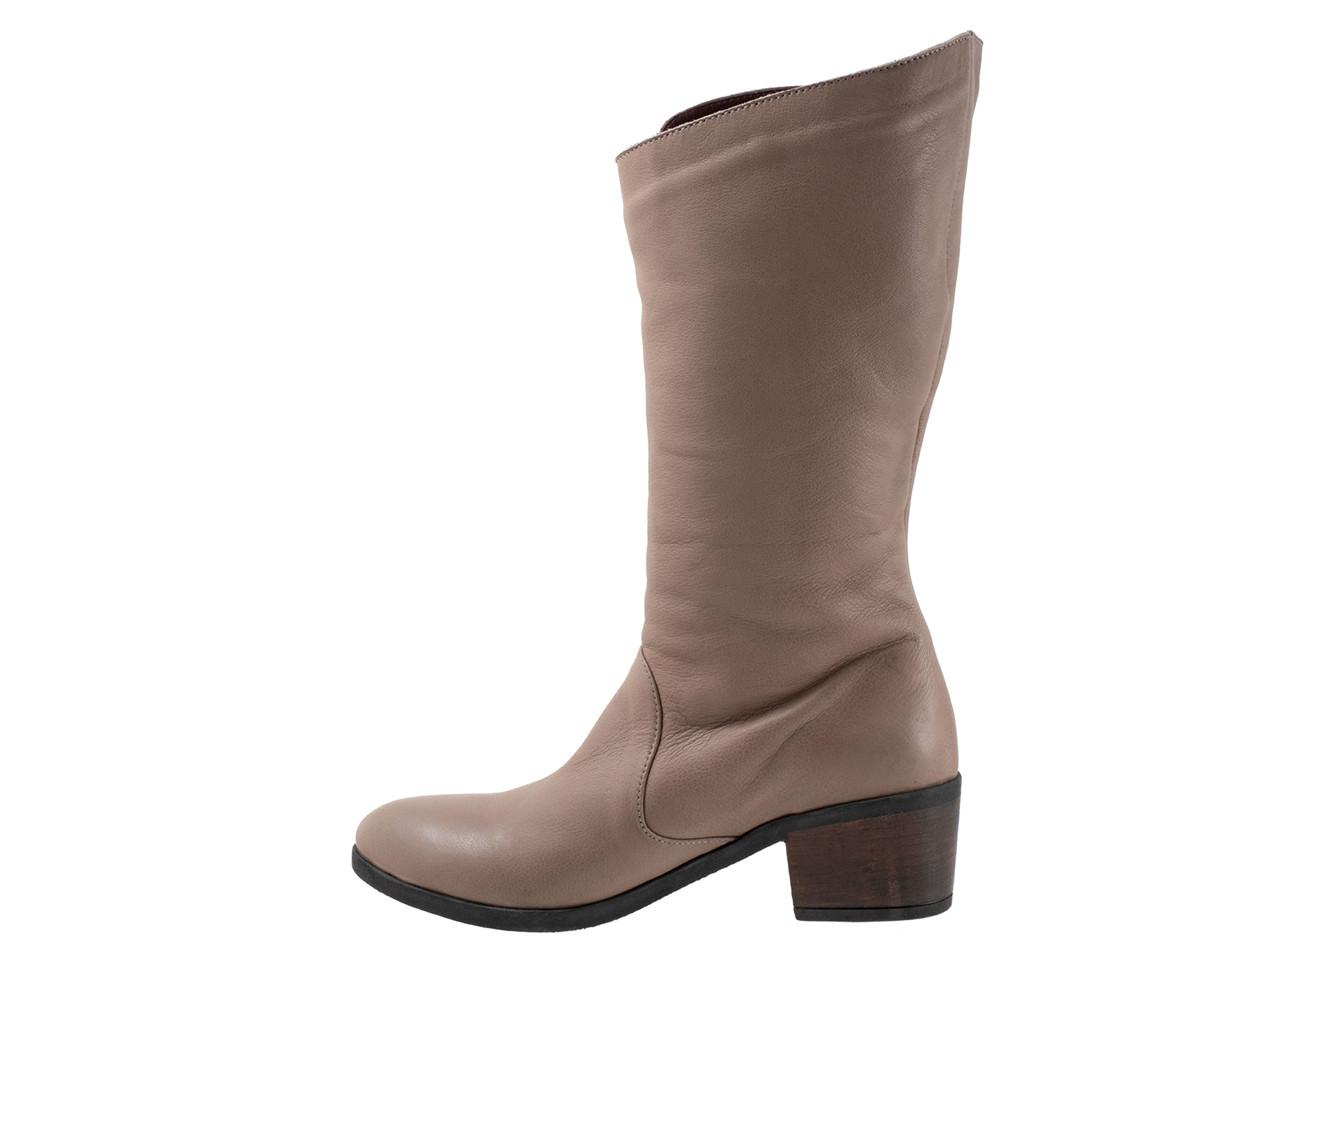 Women's Bueno Camille Knee High Boots